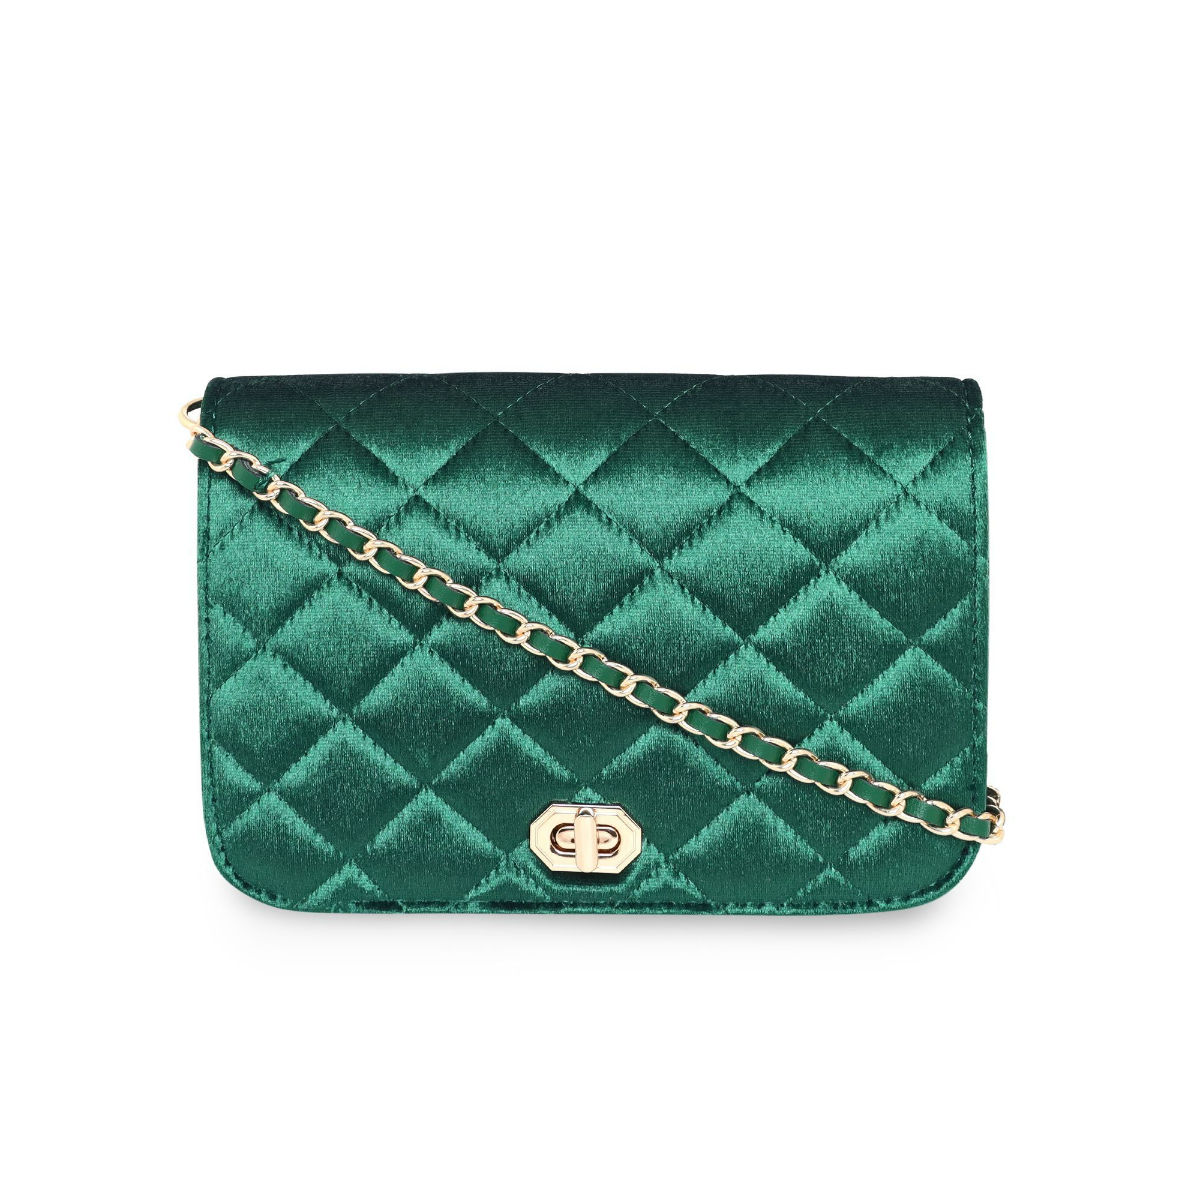 GB Girls Velvet Quilted Channel Bag - One Size